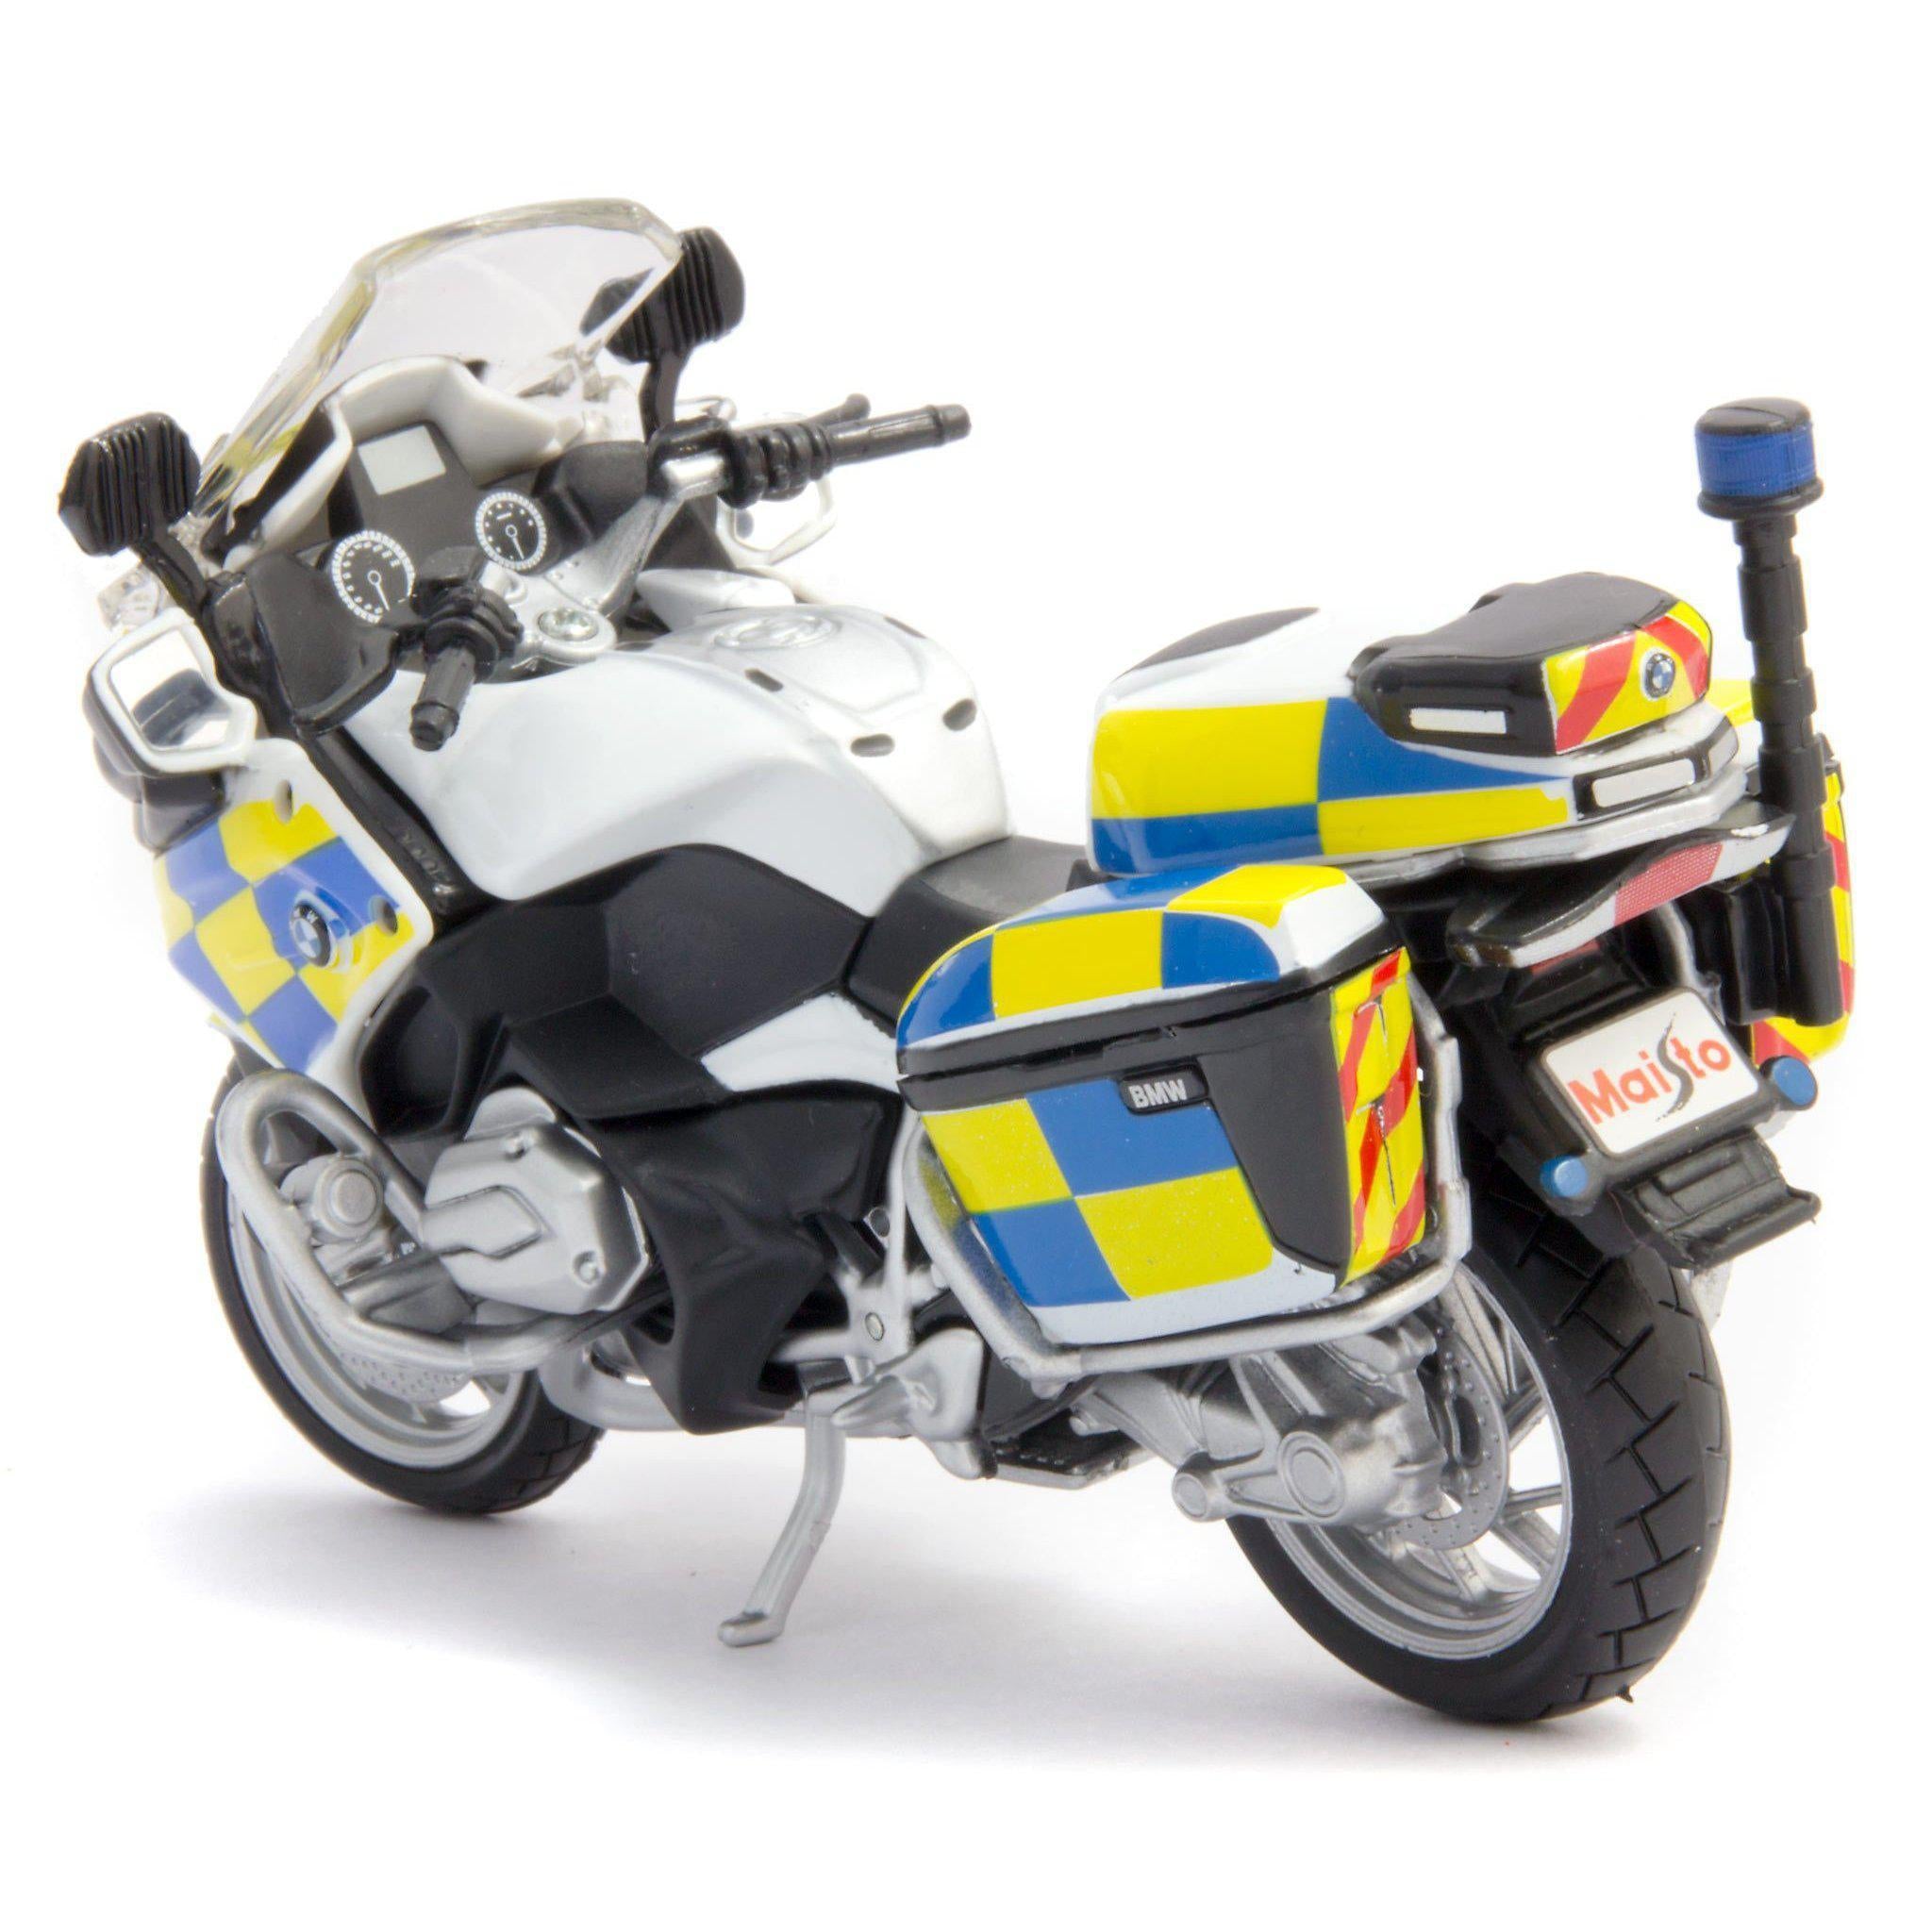 BMW R 1200 RT Police - 1:18 Scale Diecast Model Motorcycle